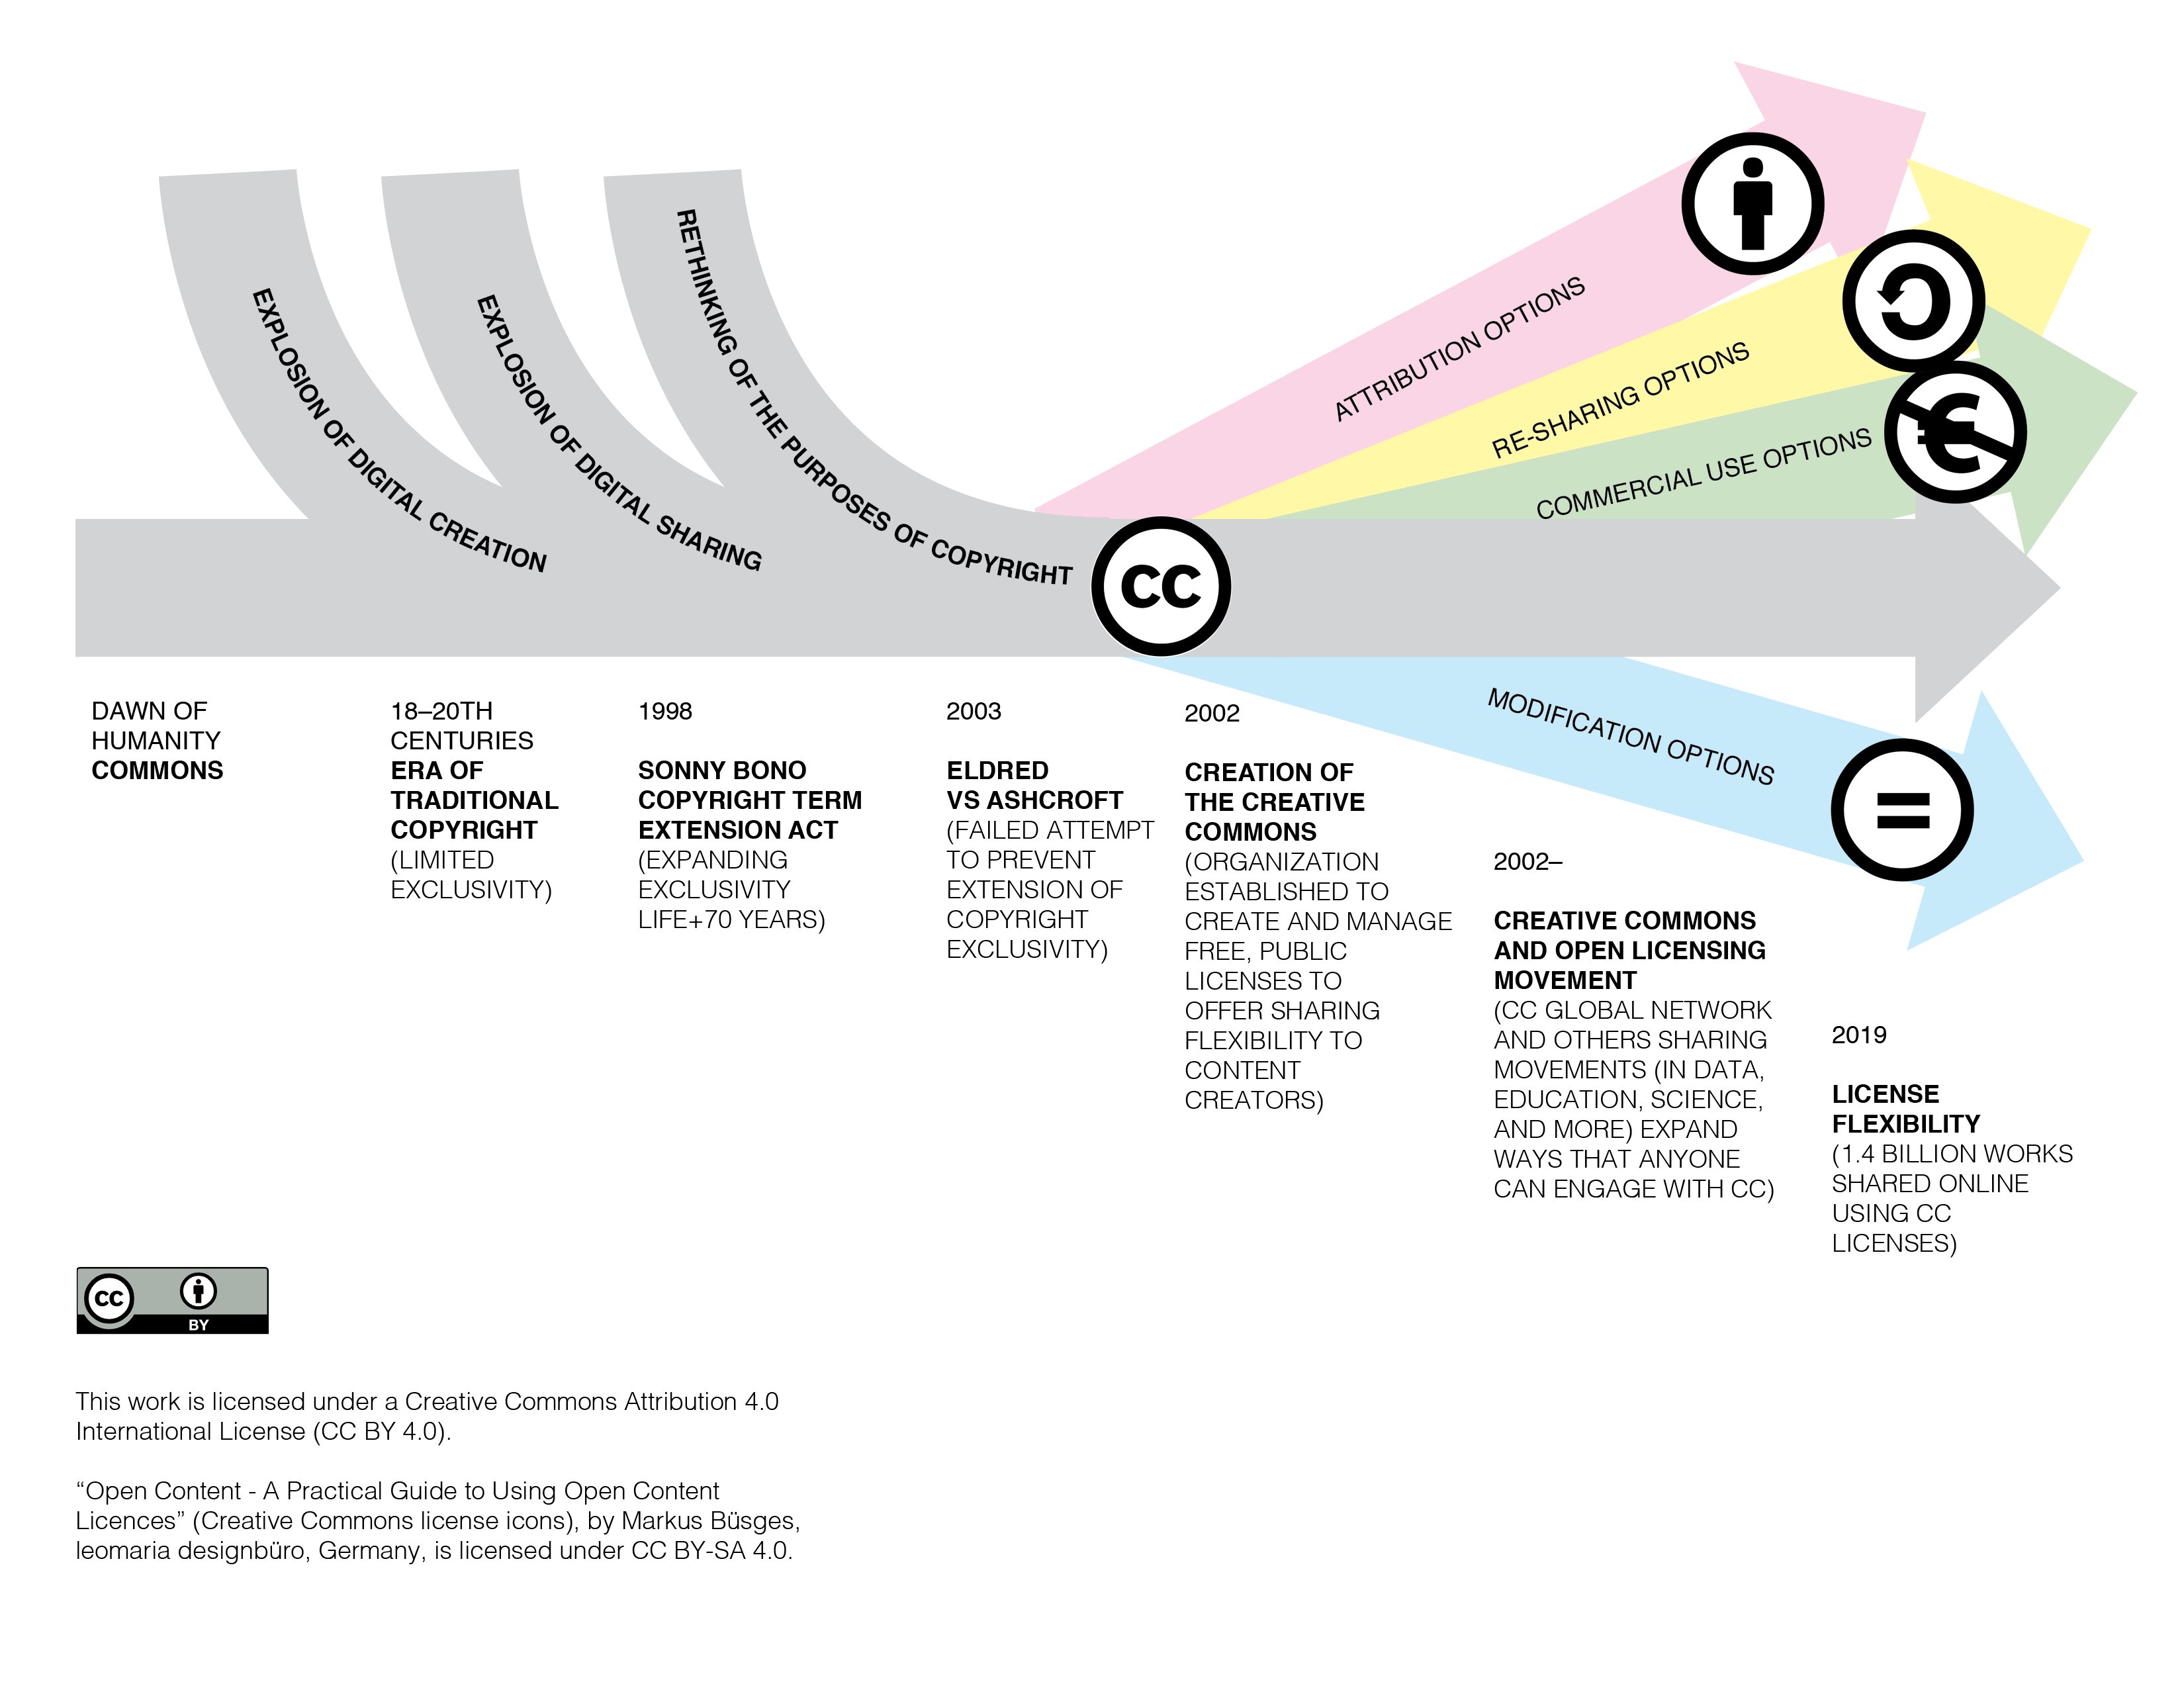 Visualization of key historical events that led to the creation of the Creative Commons